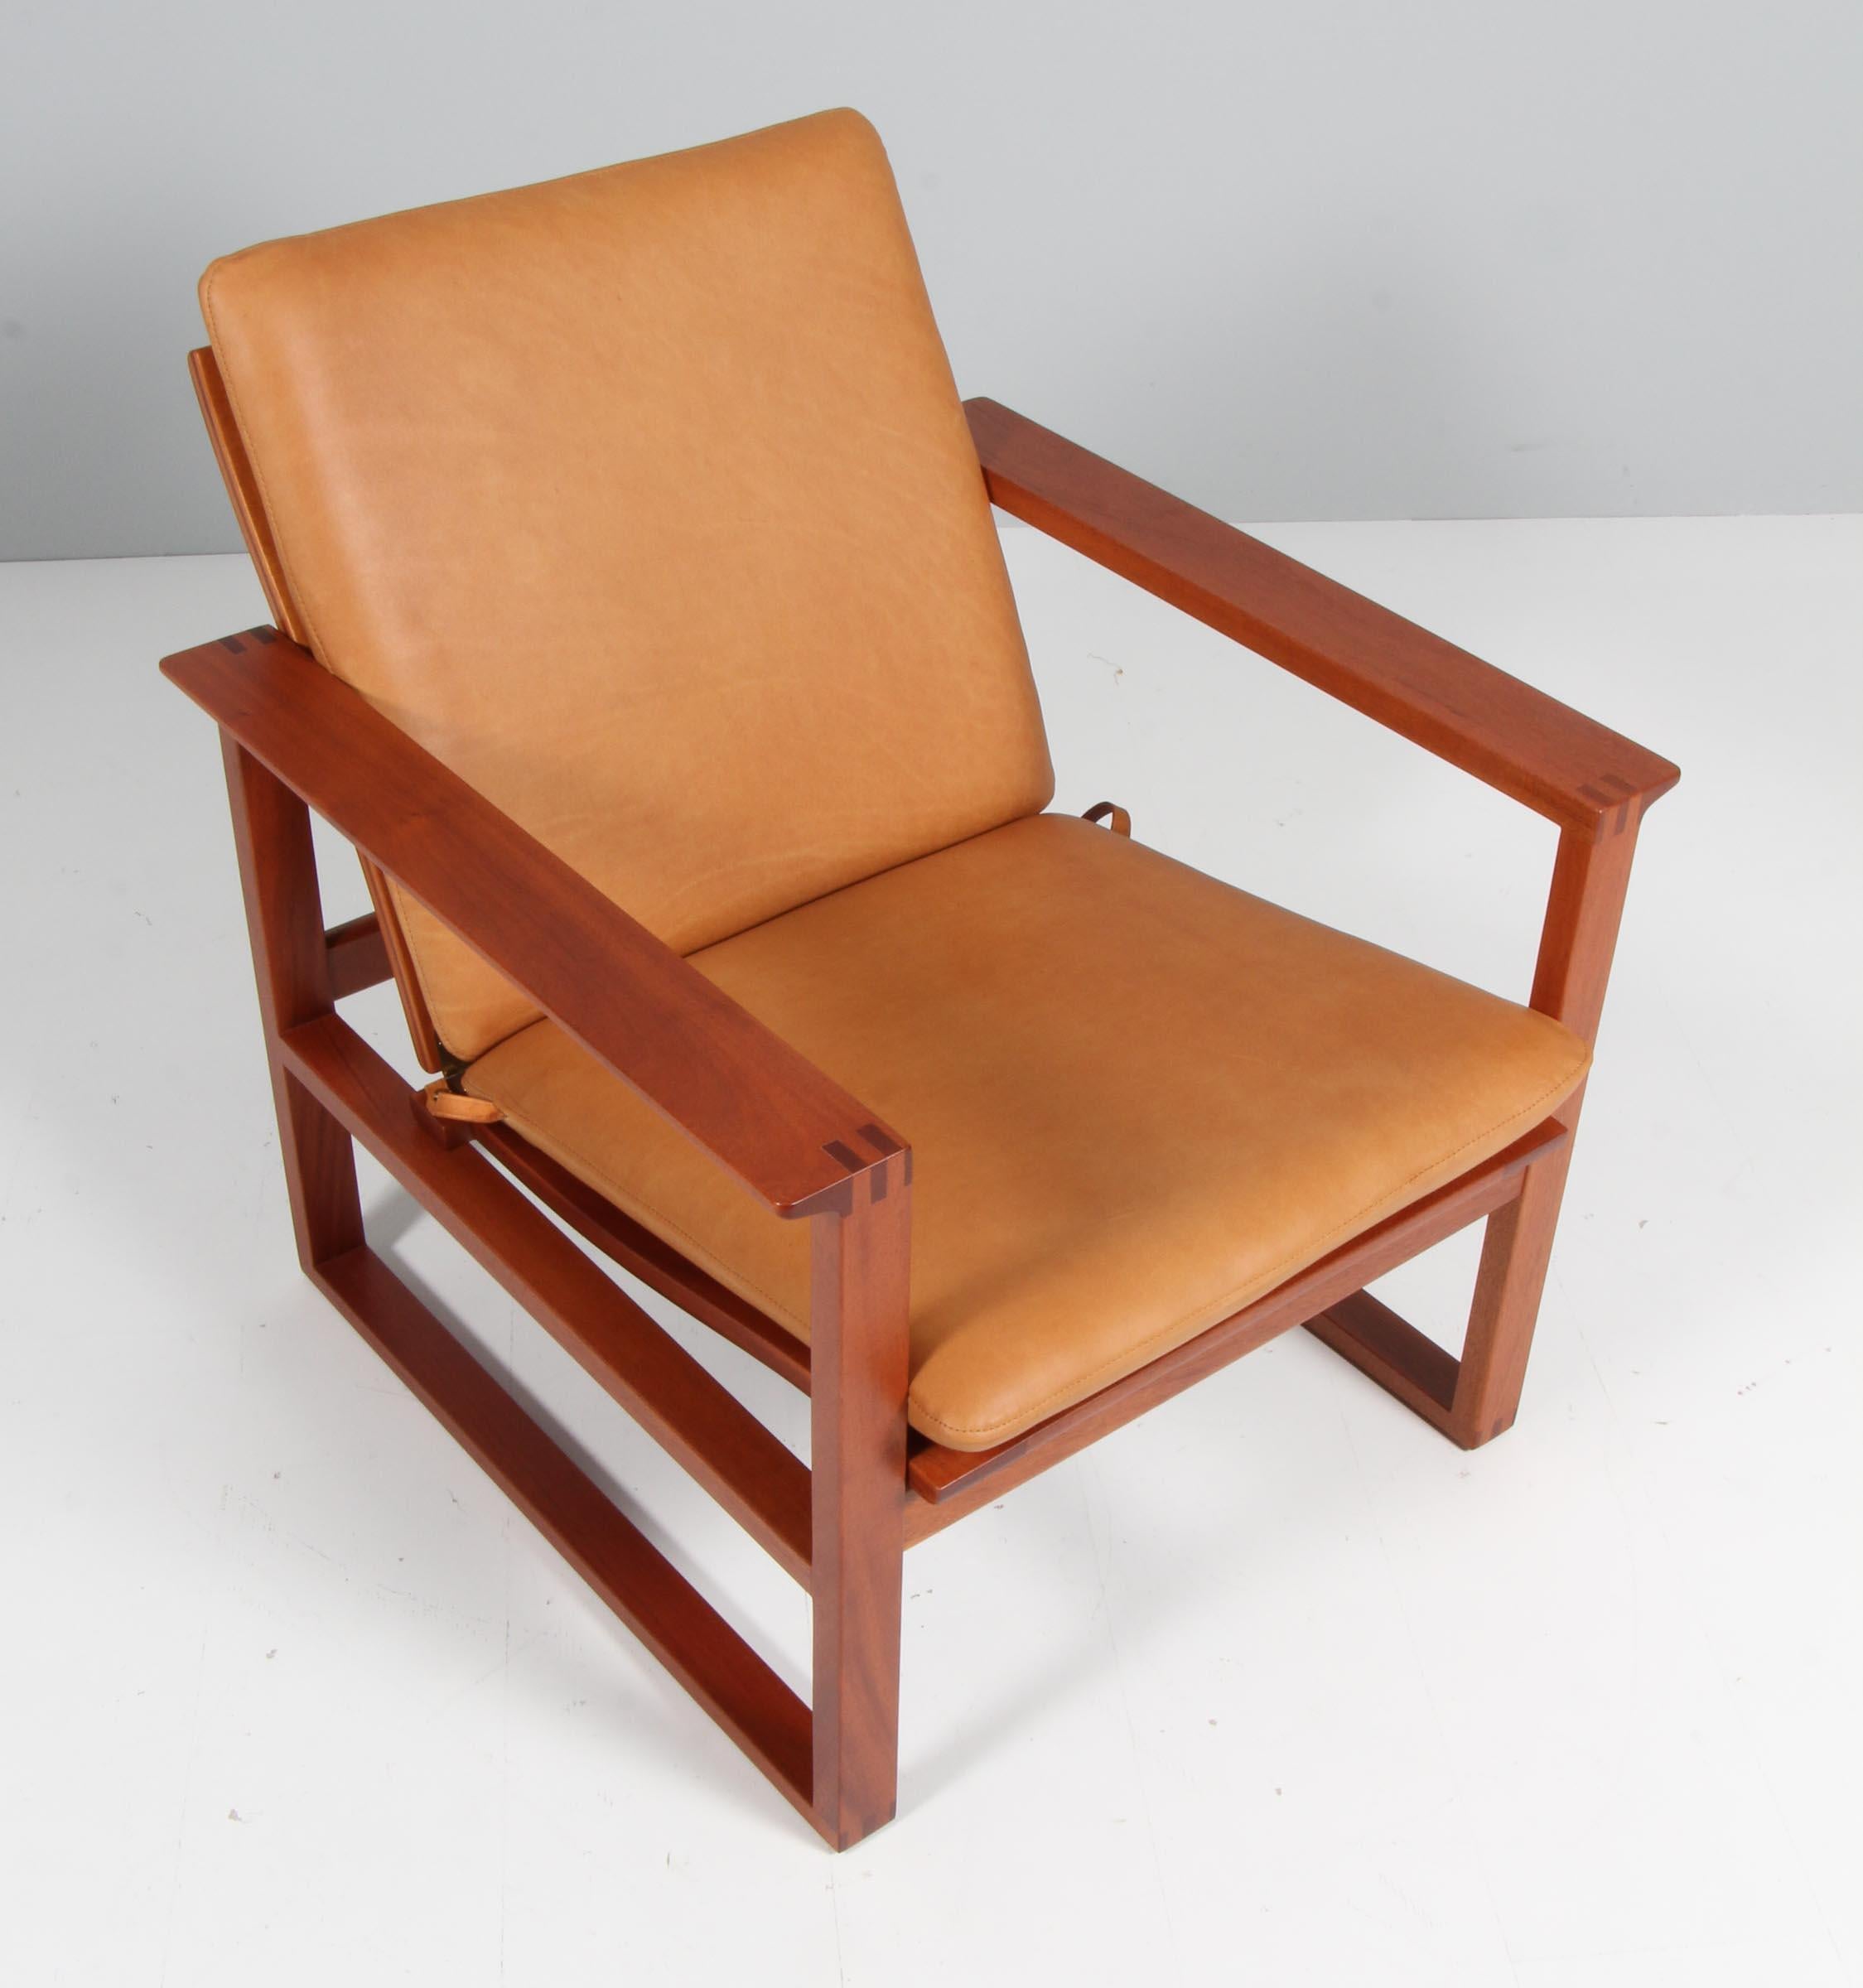 Børge Mogensen lounge chair new upholstered with vintage tan aniline leather.

Frame of mahogany.

Model 2256, made by Fredericia furniture.